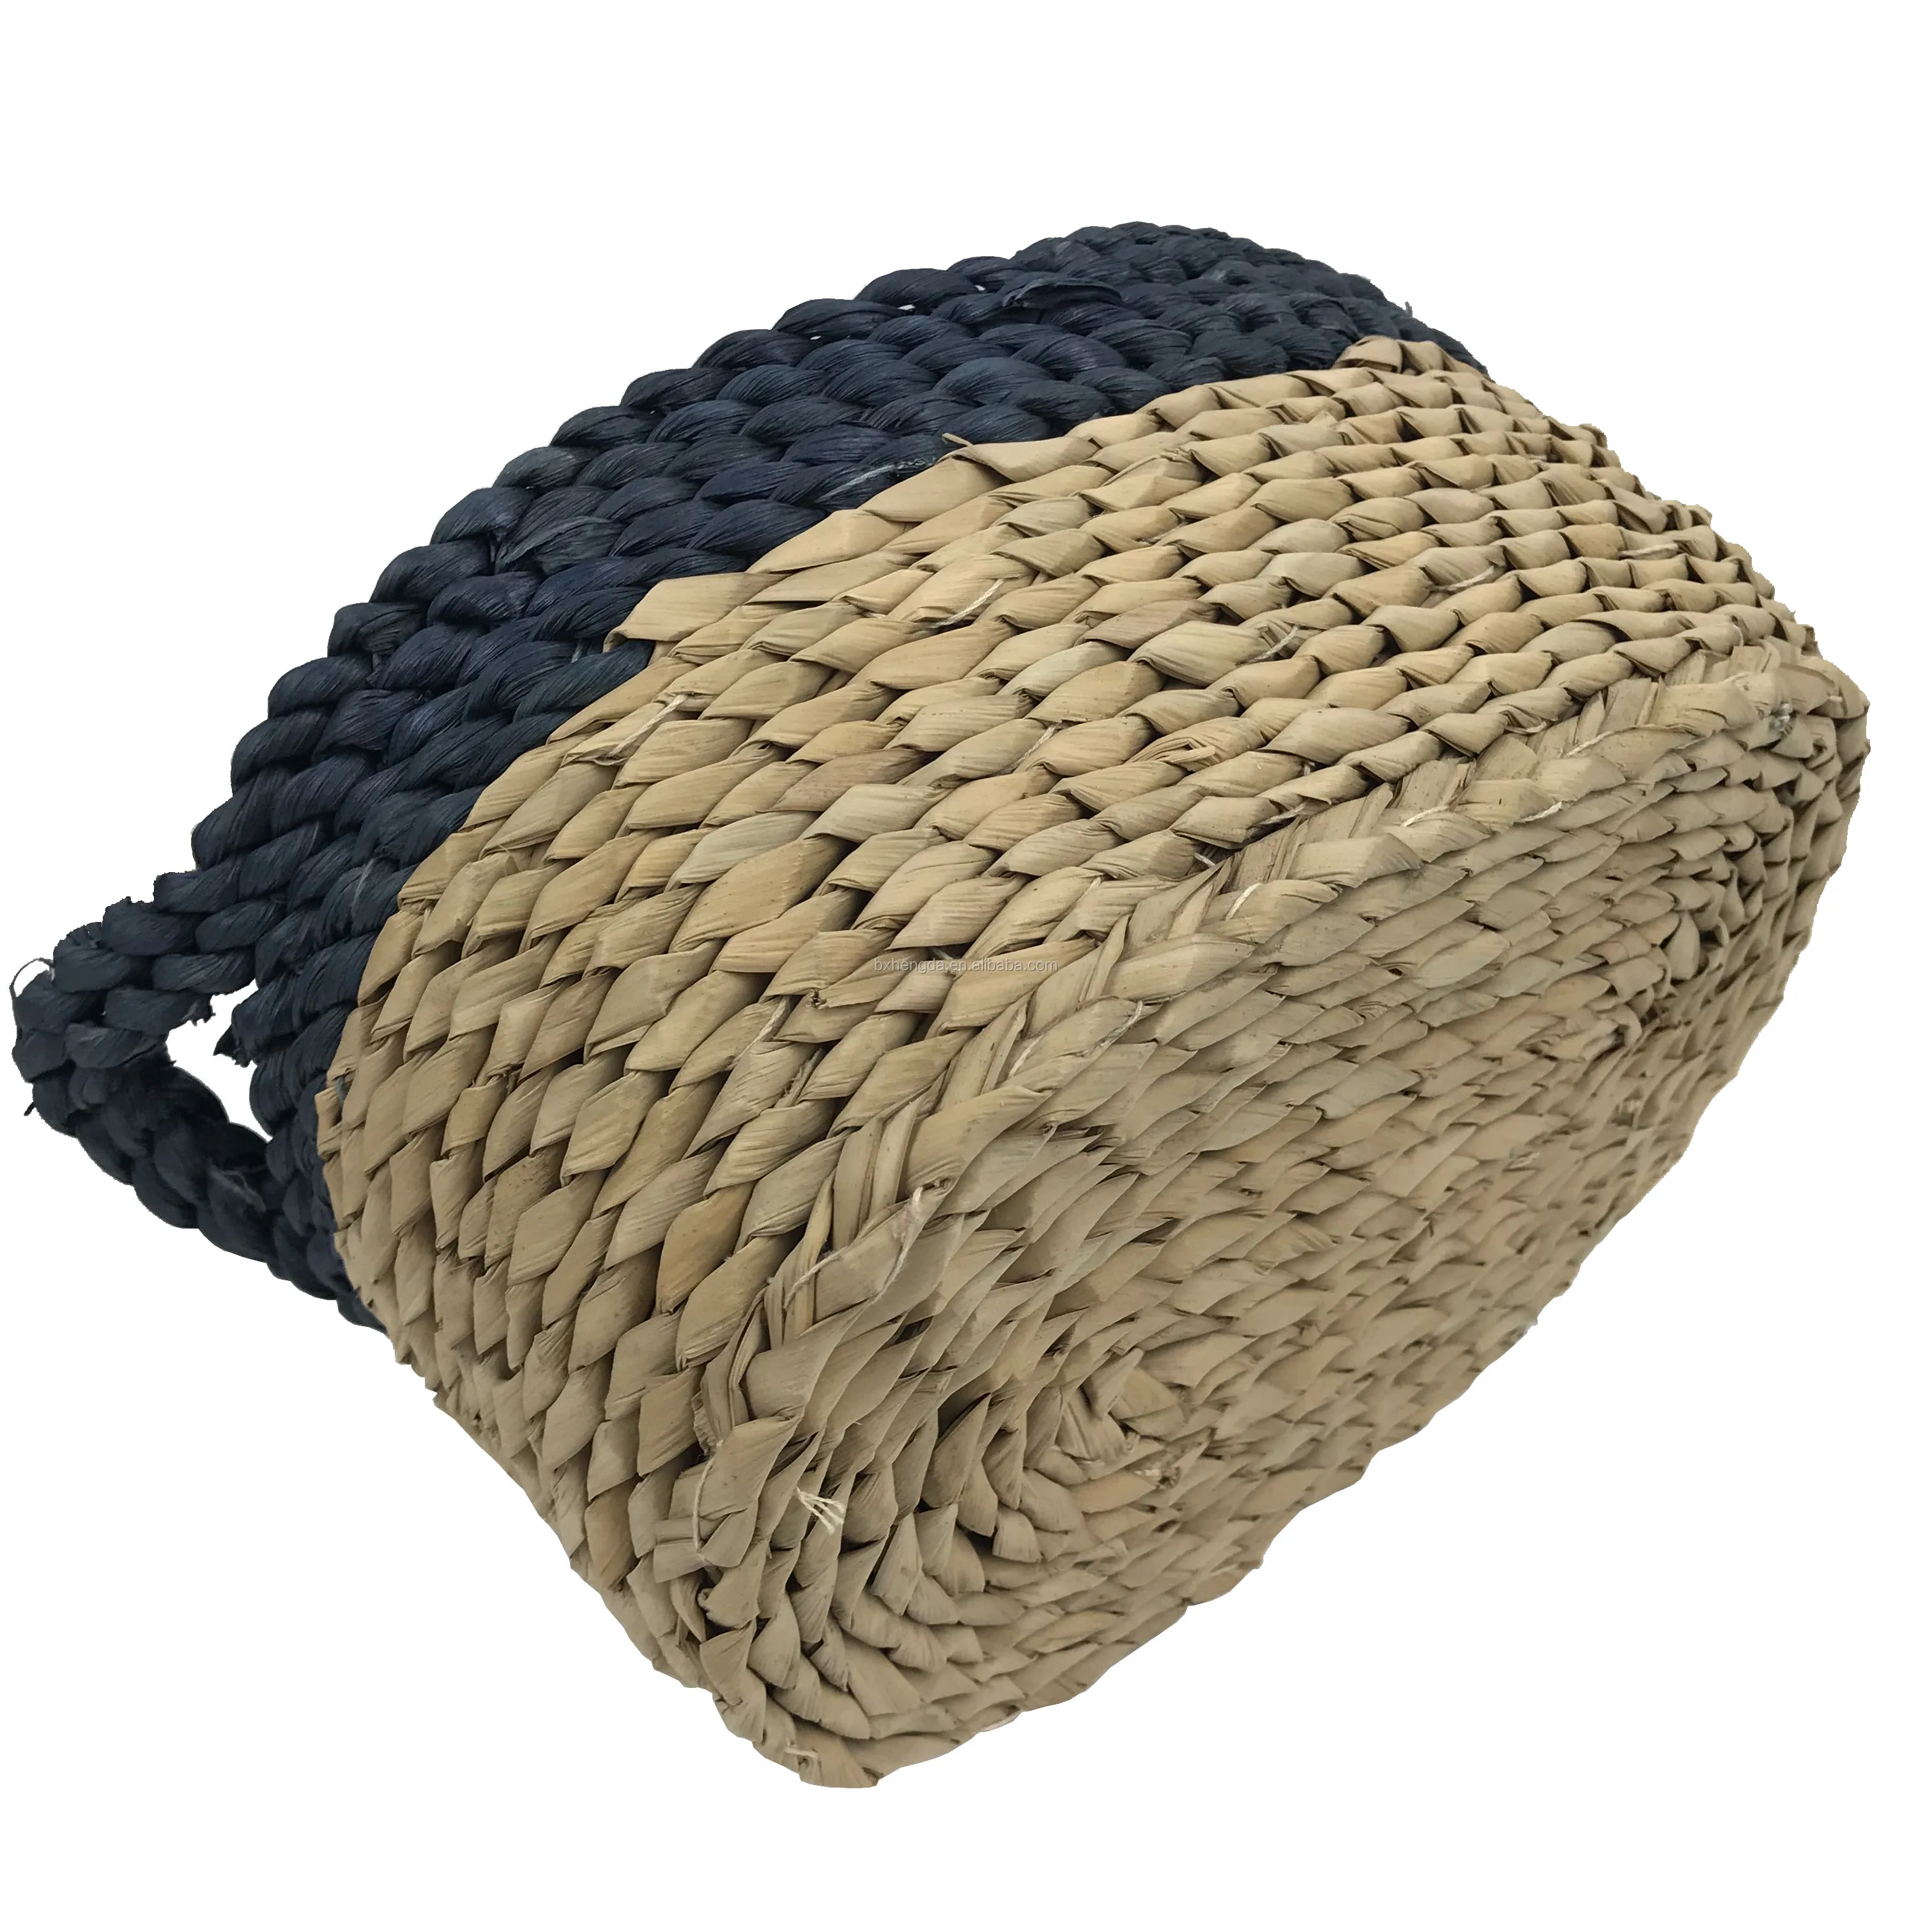 Eco Friendly Rectangle Seagrass natual grass storage baskets for bathroom Customized